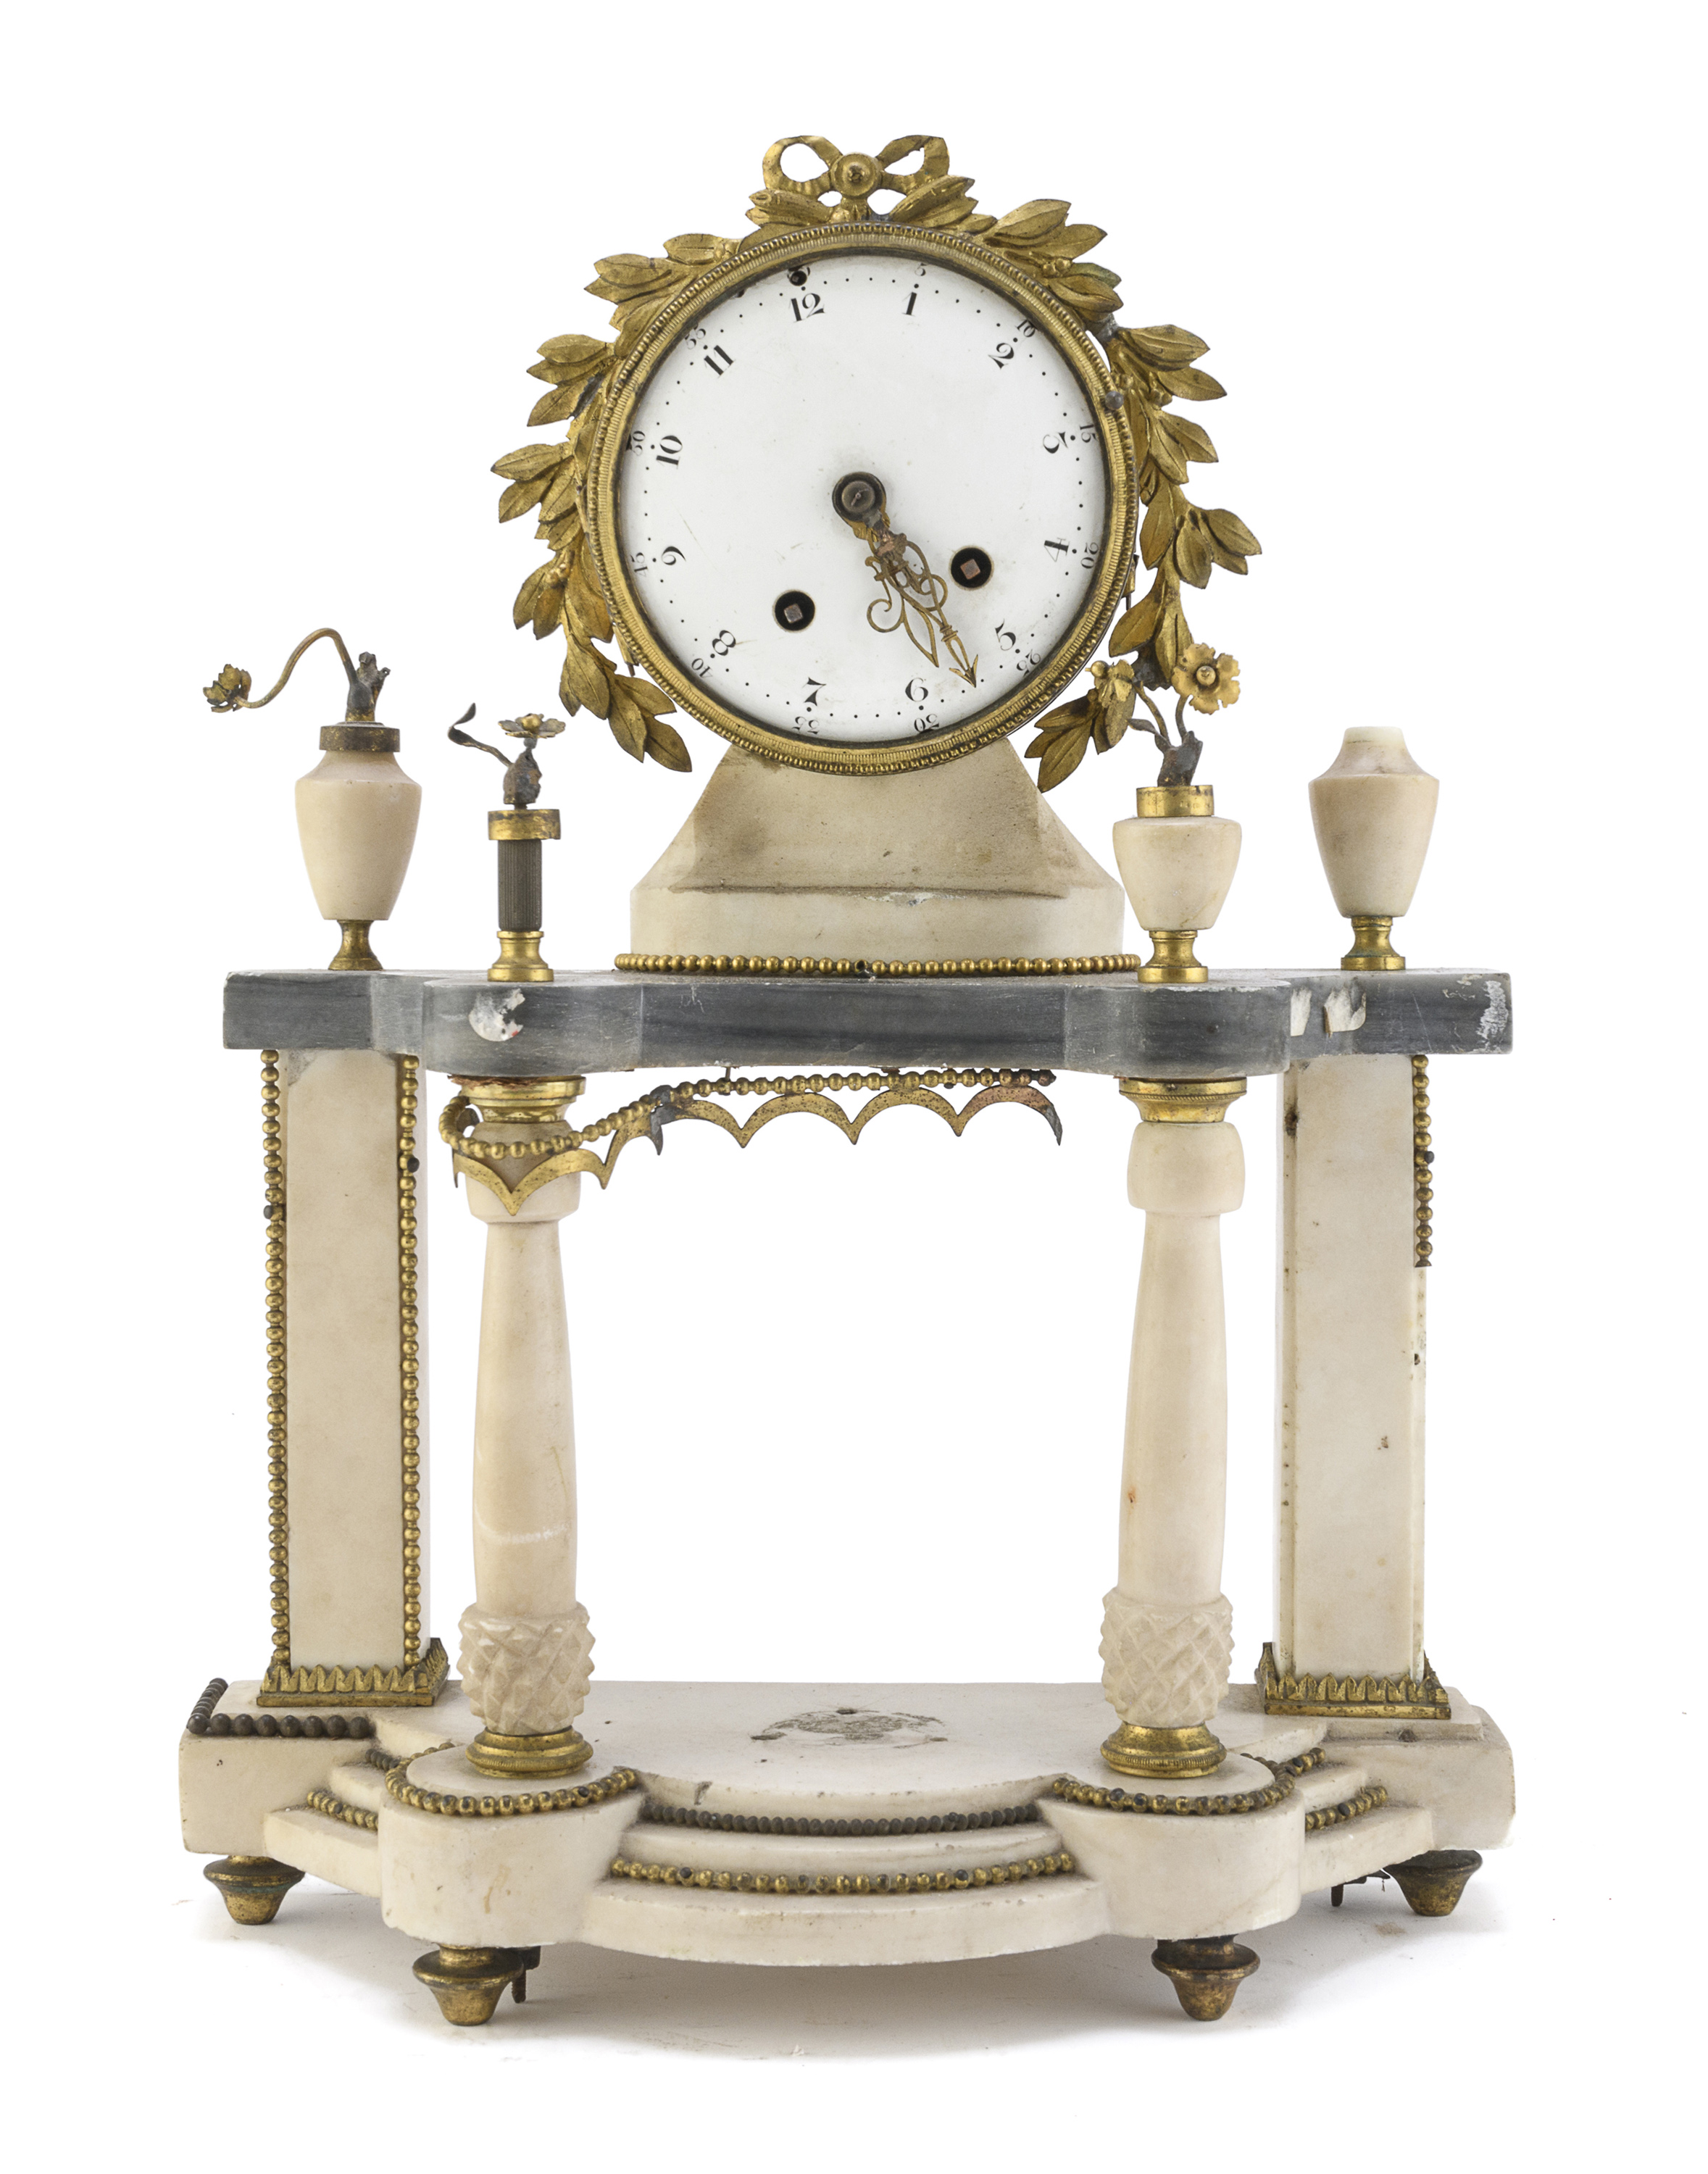 FIREPLACE CLOCK IN WHITE MARBLE FRANCE EARLY 19th CENTURY